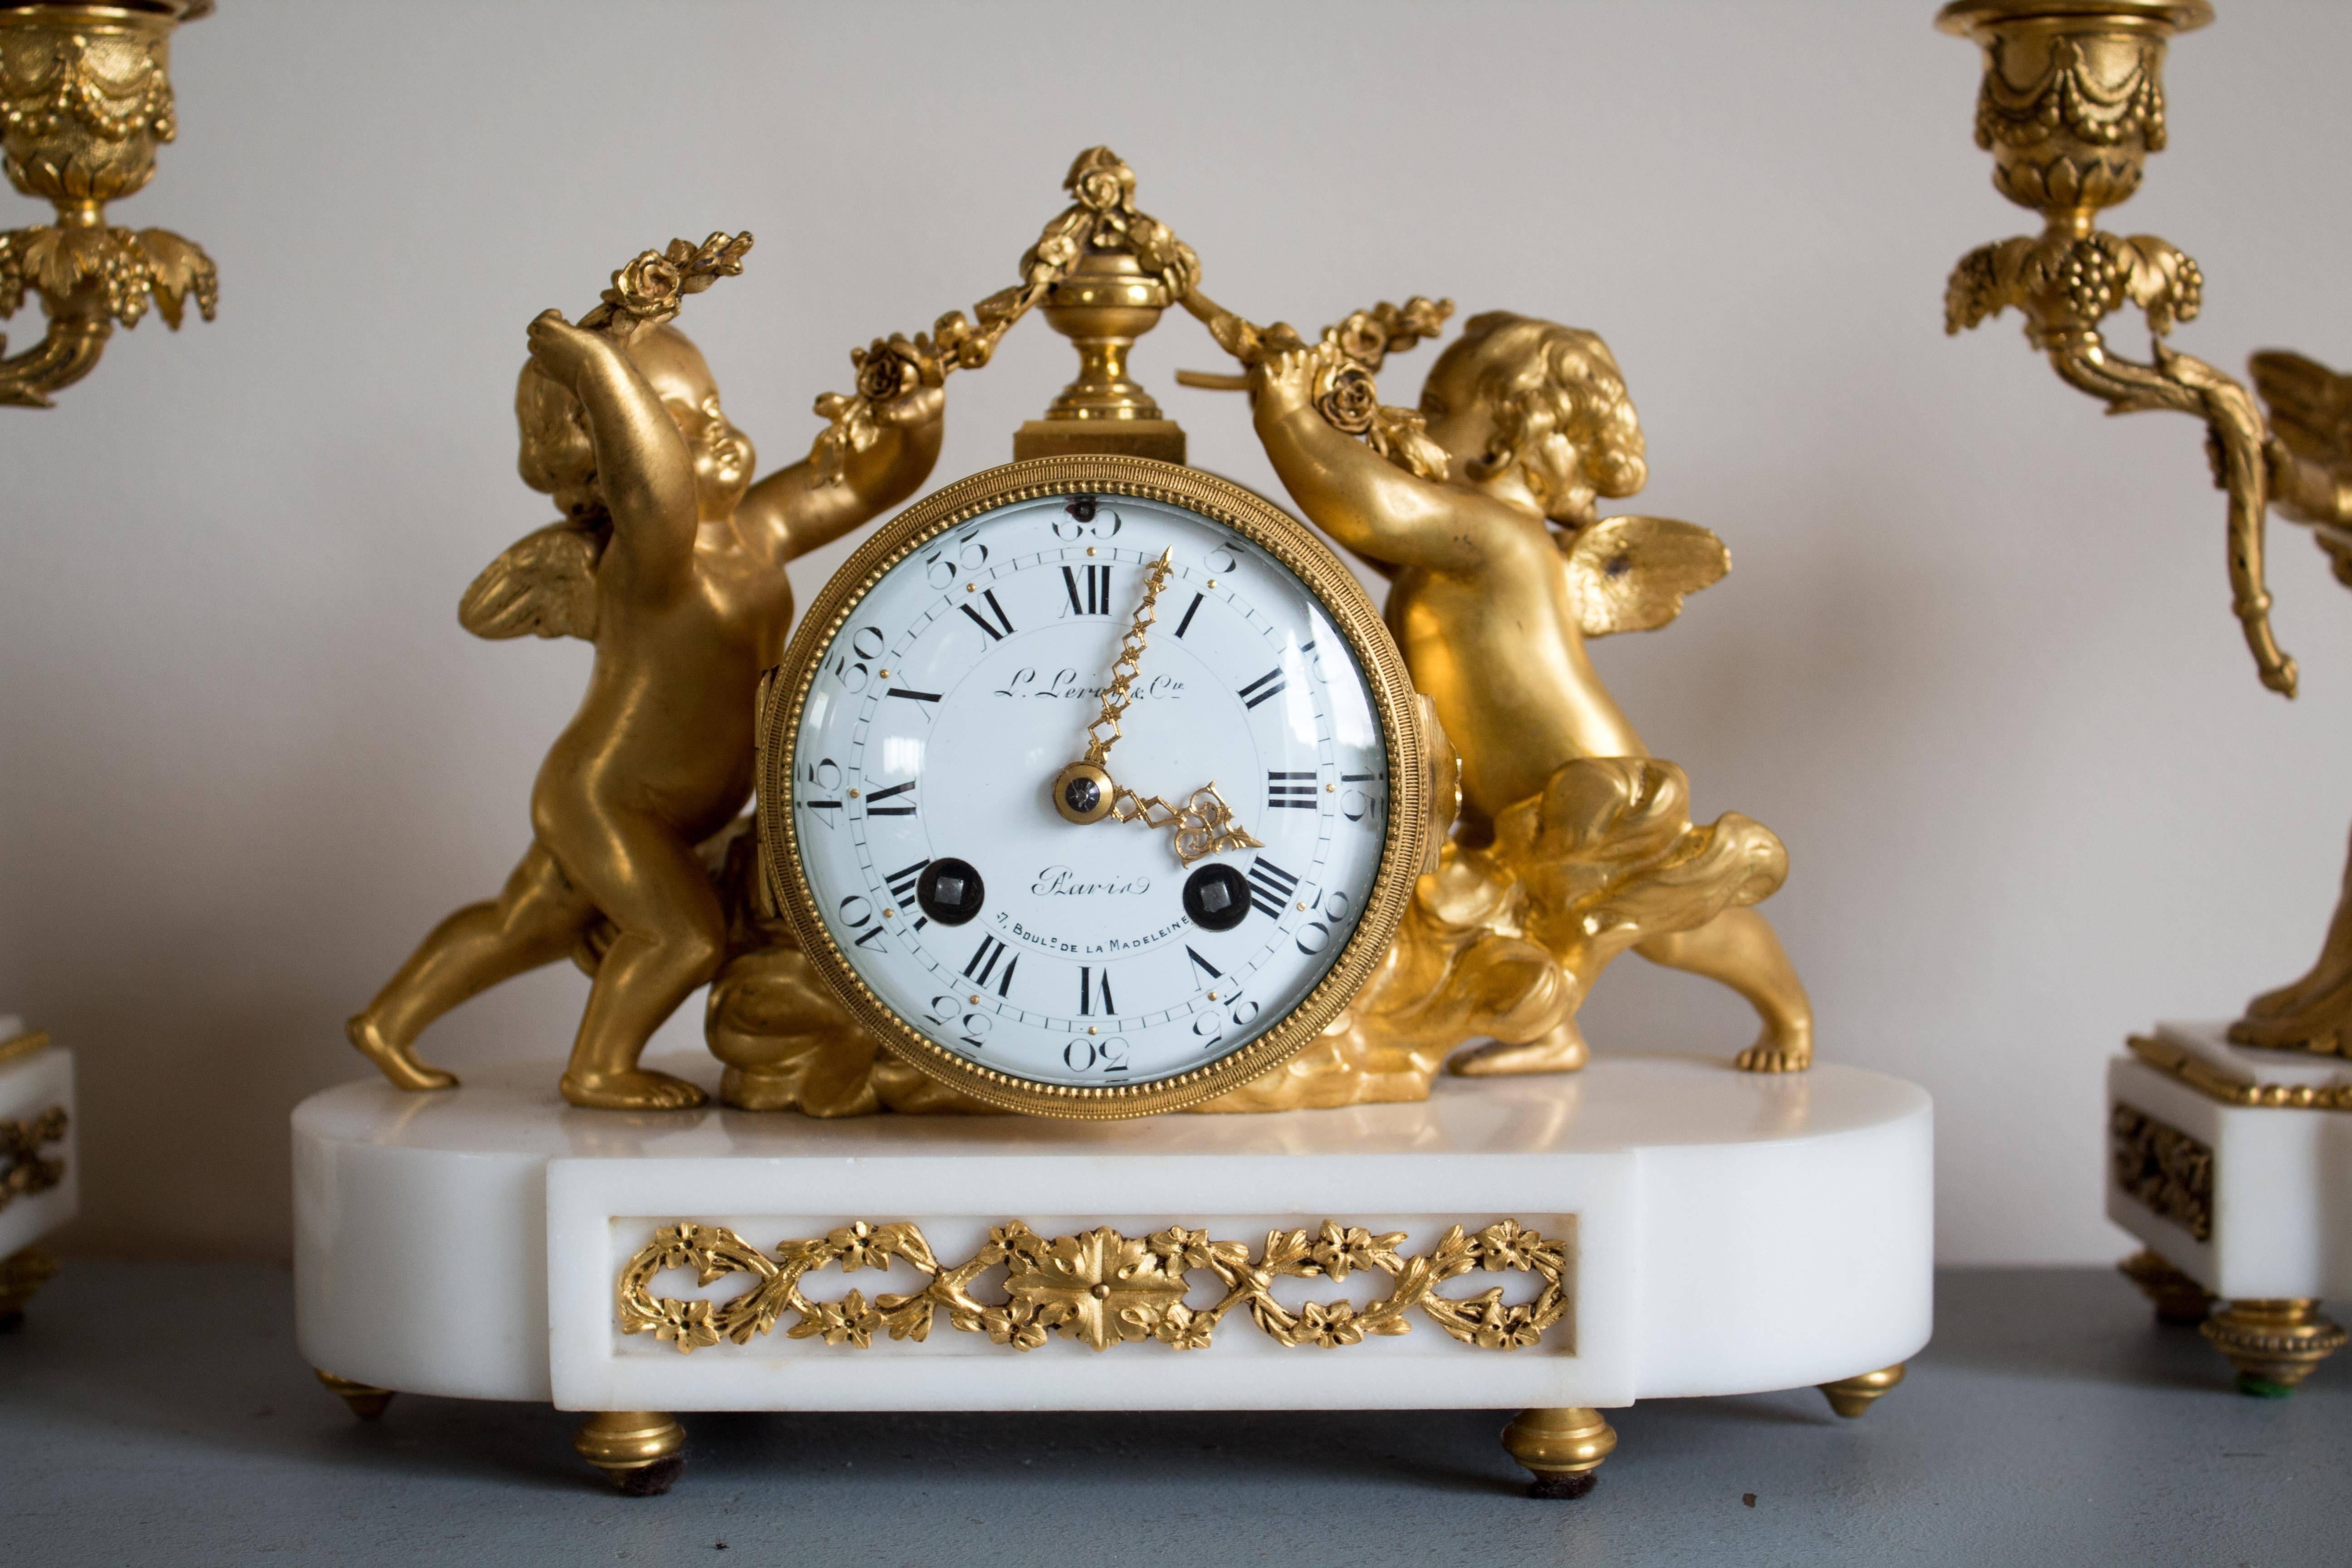 Delightful Louis XVI style set that was crafted by the famous L.Leroy & Cie founded first mid-18th century.
White marble base resting on bun feet, gilt bronze clock with white enameled dial flanked by putti with floral guirlands.
Pair of